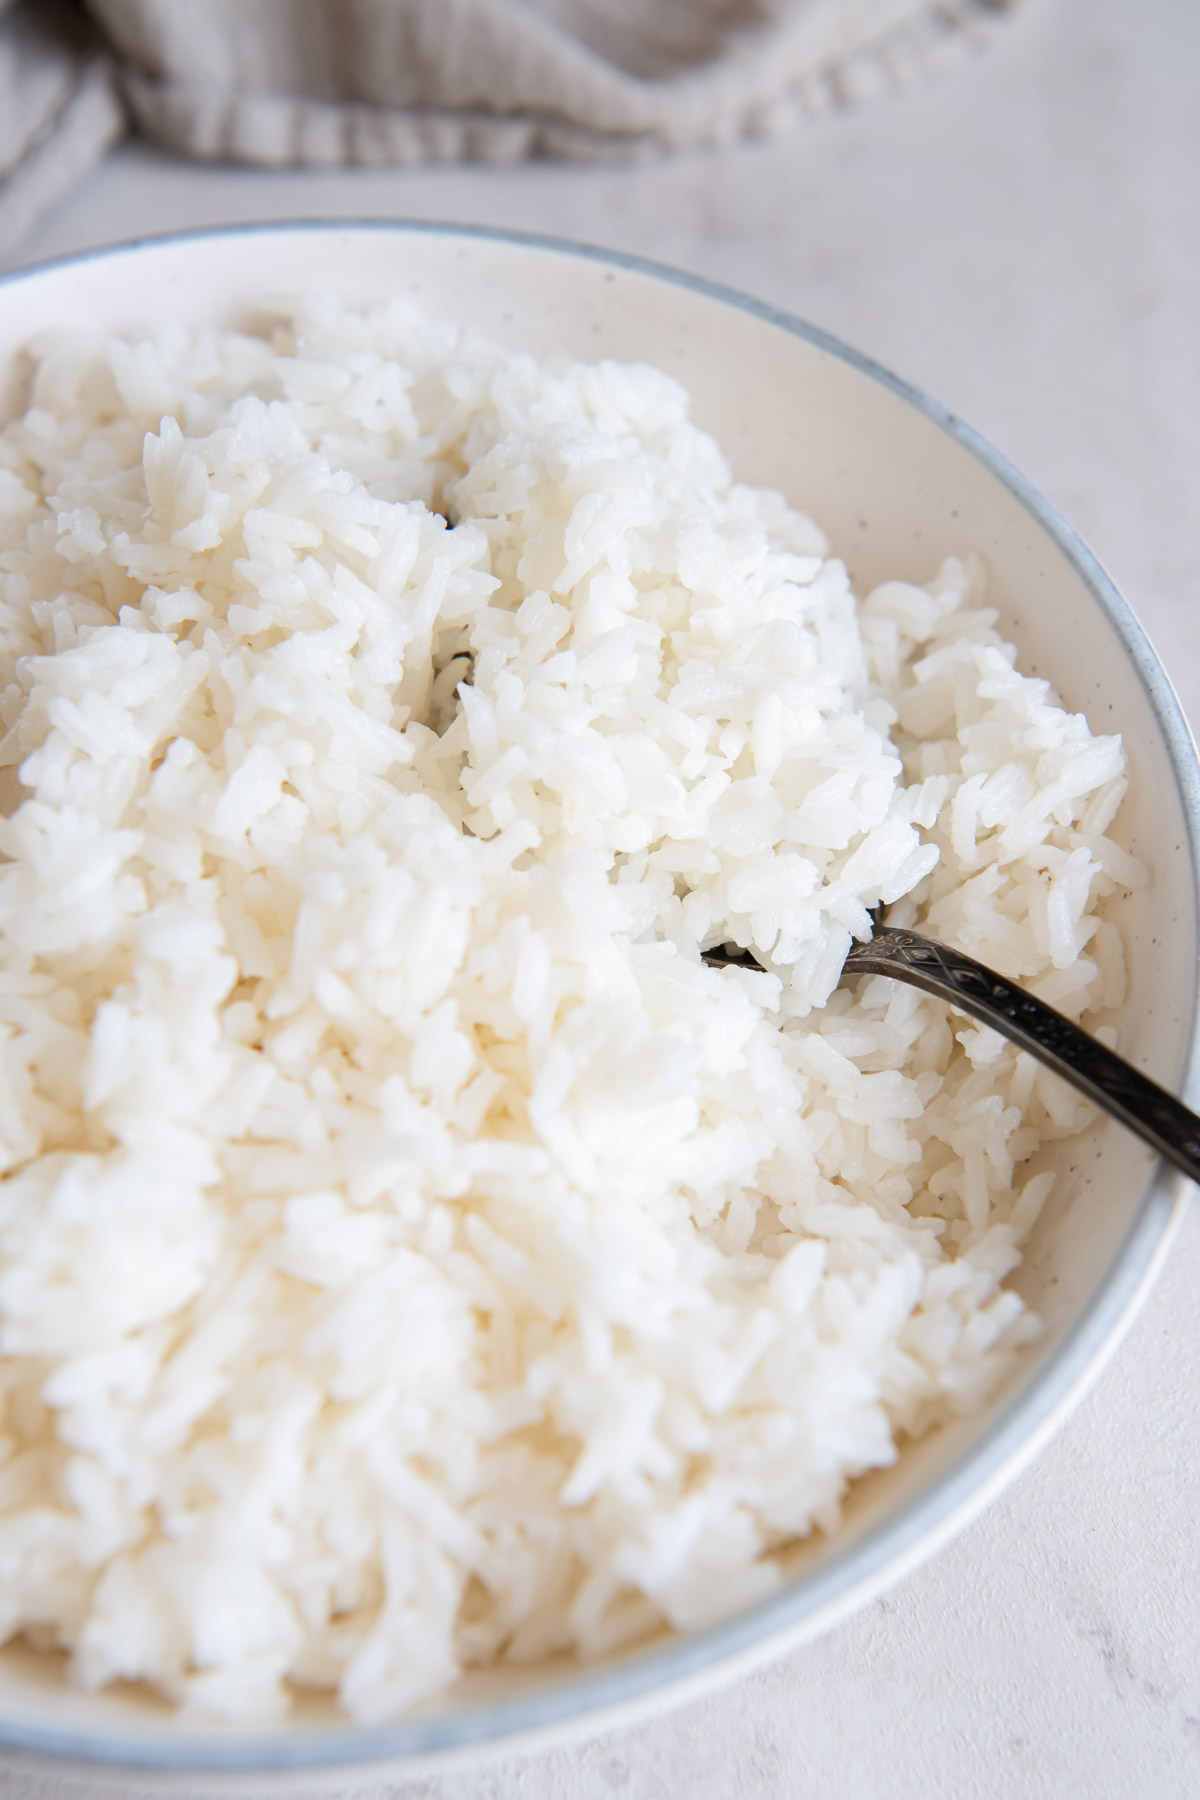 How To Stop Your Pot Of Rice From Bubbling Over